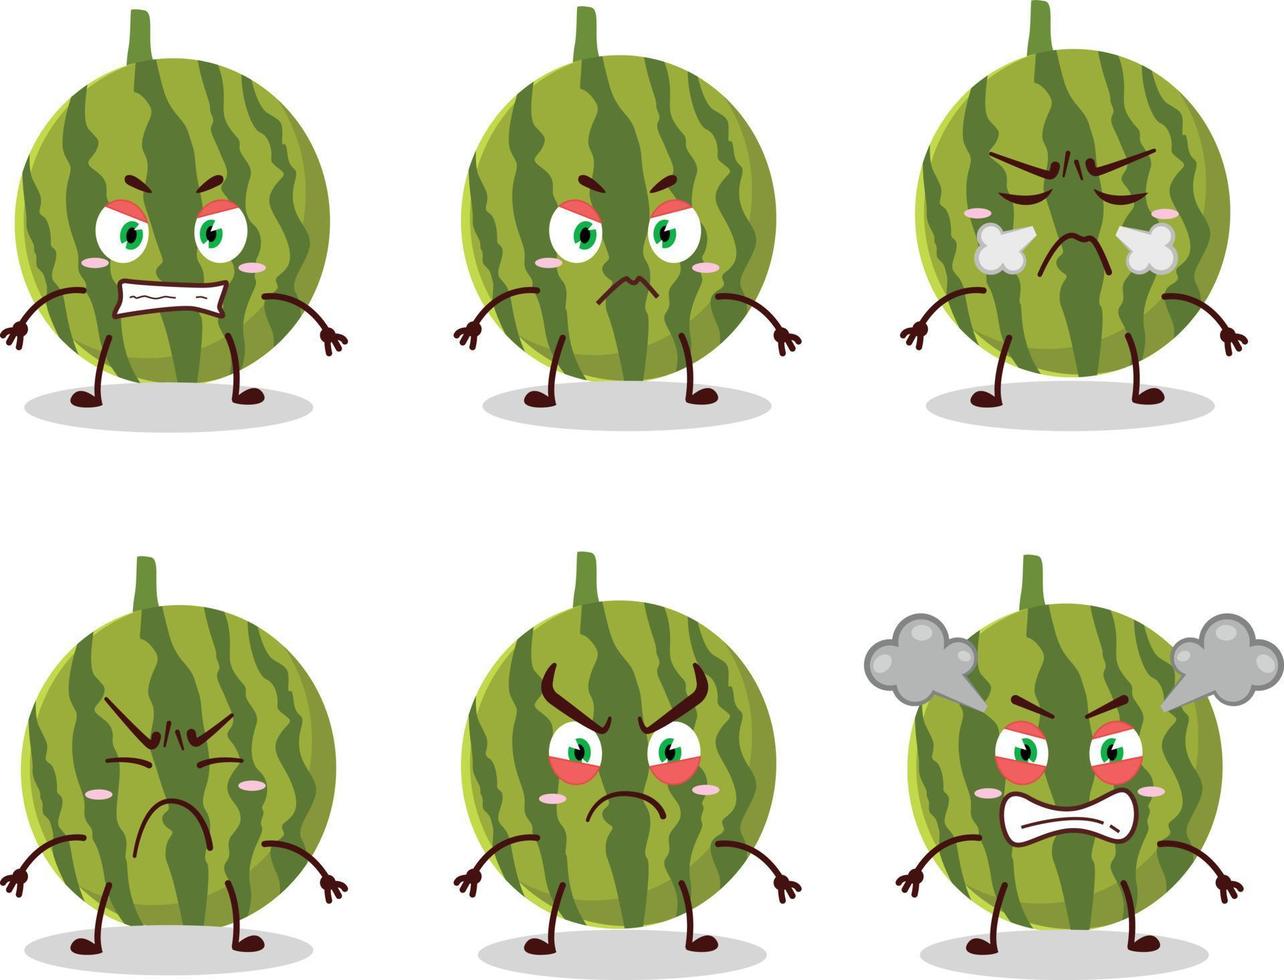 Watermelon cartoon character with various angry expressions vector